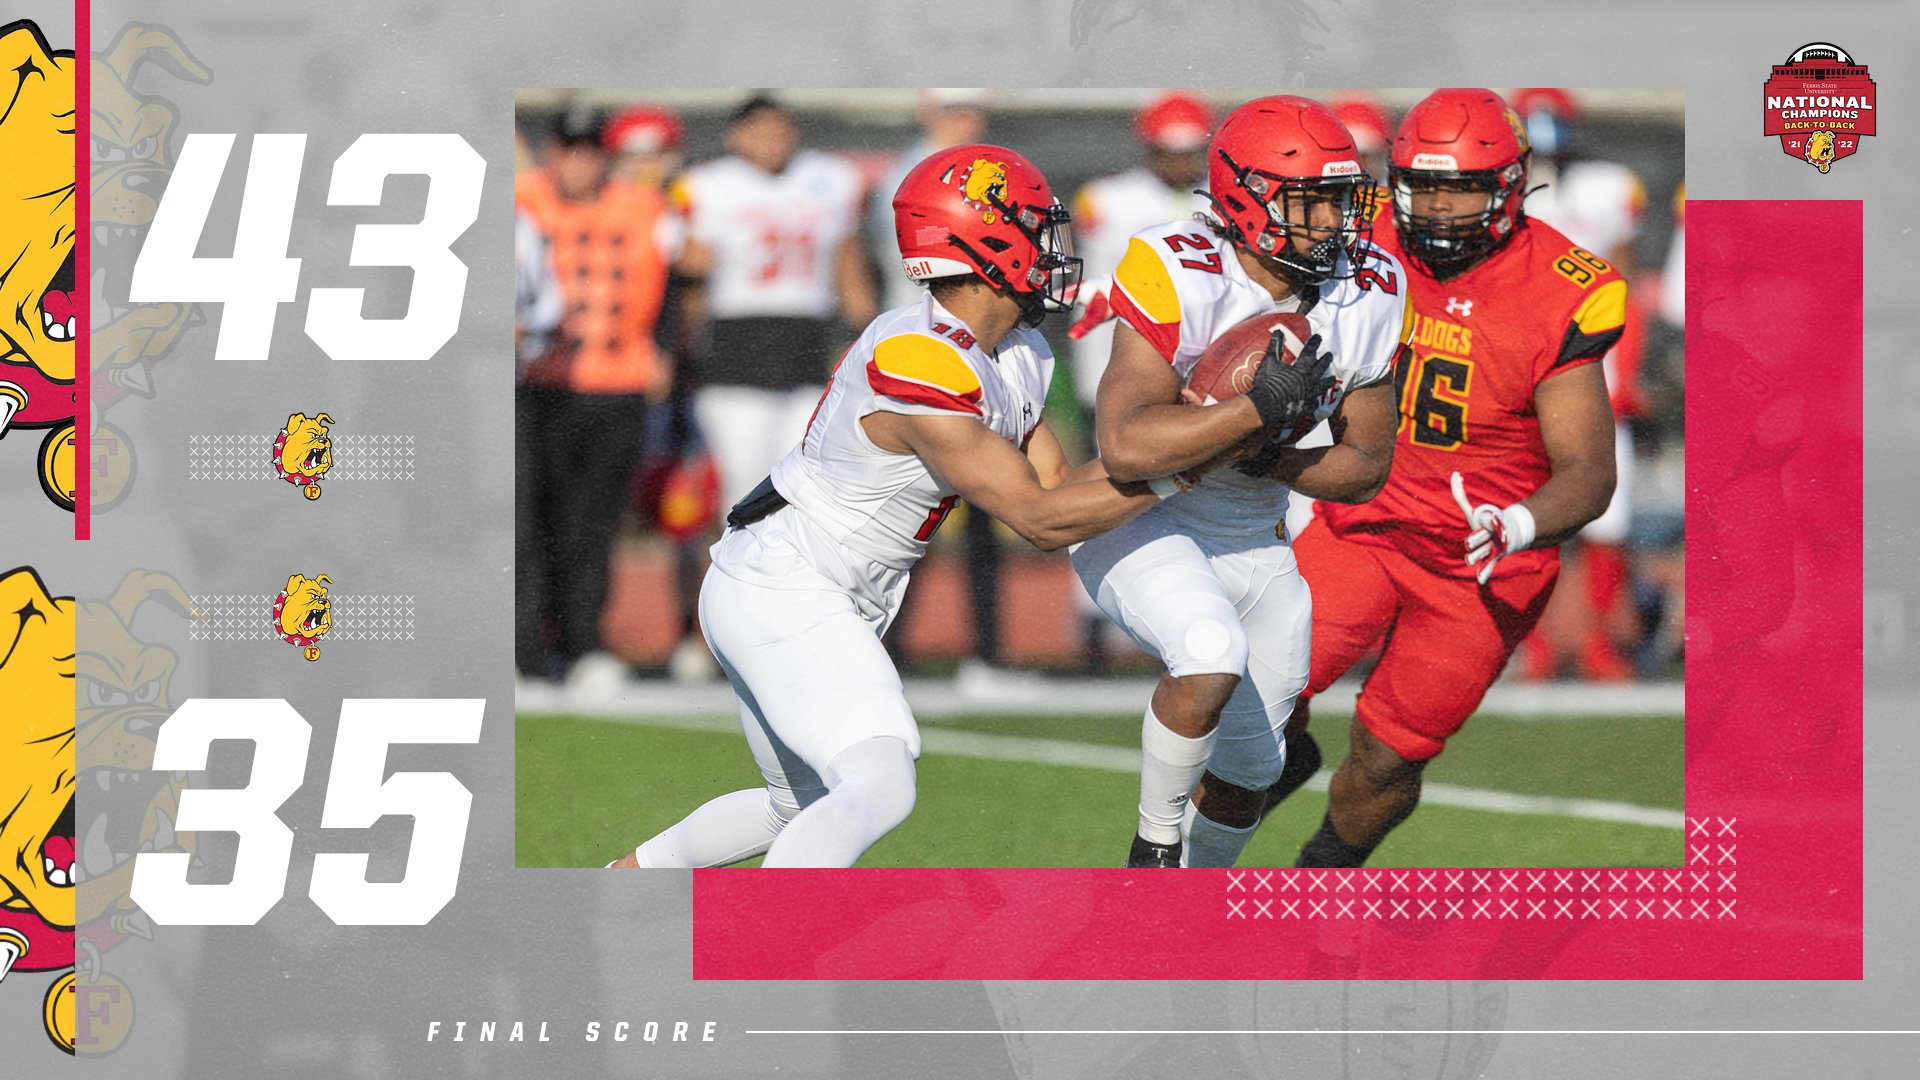 Ferris State Officially Wraps Up Spring Football Drills With Spirited Spring Game